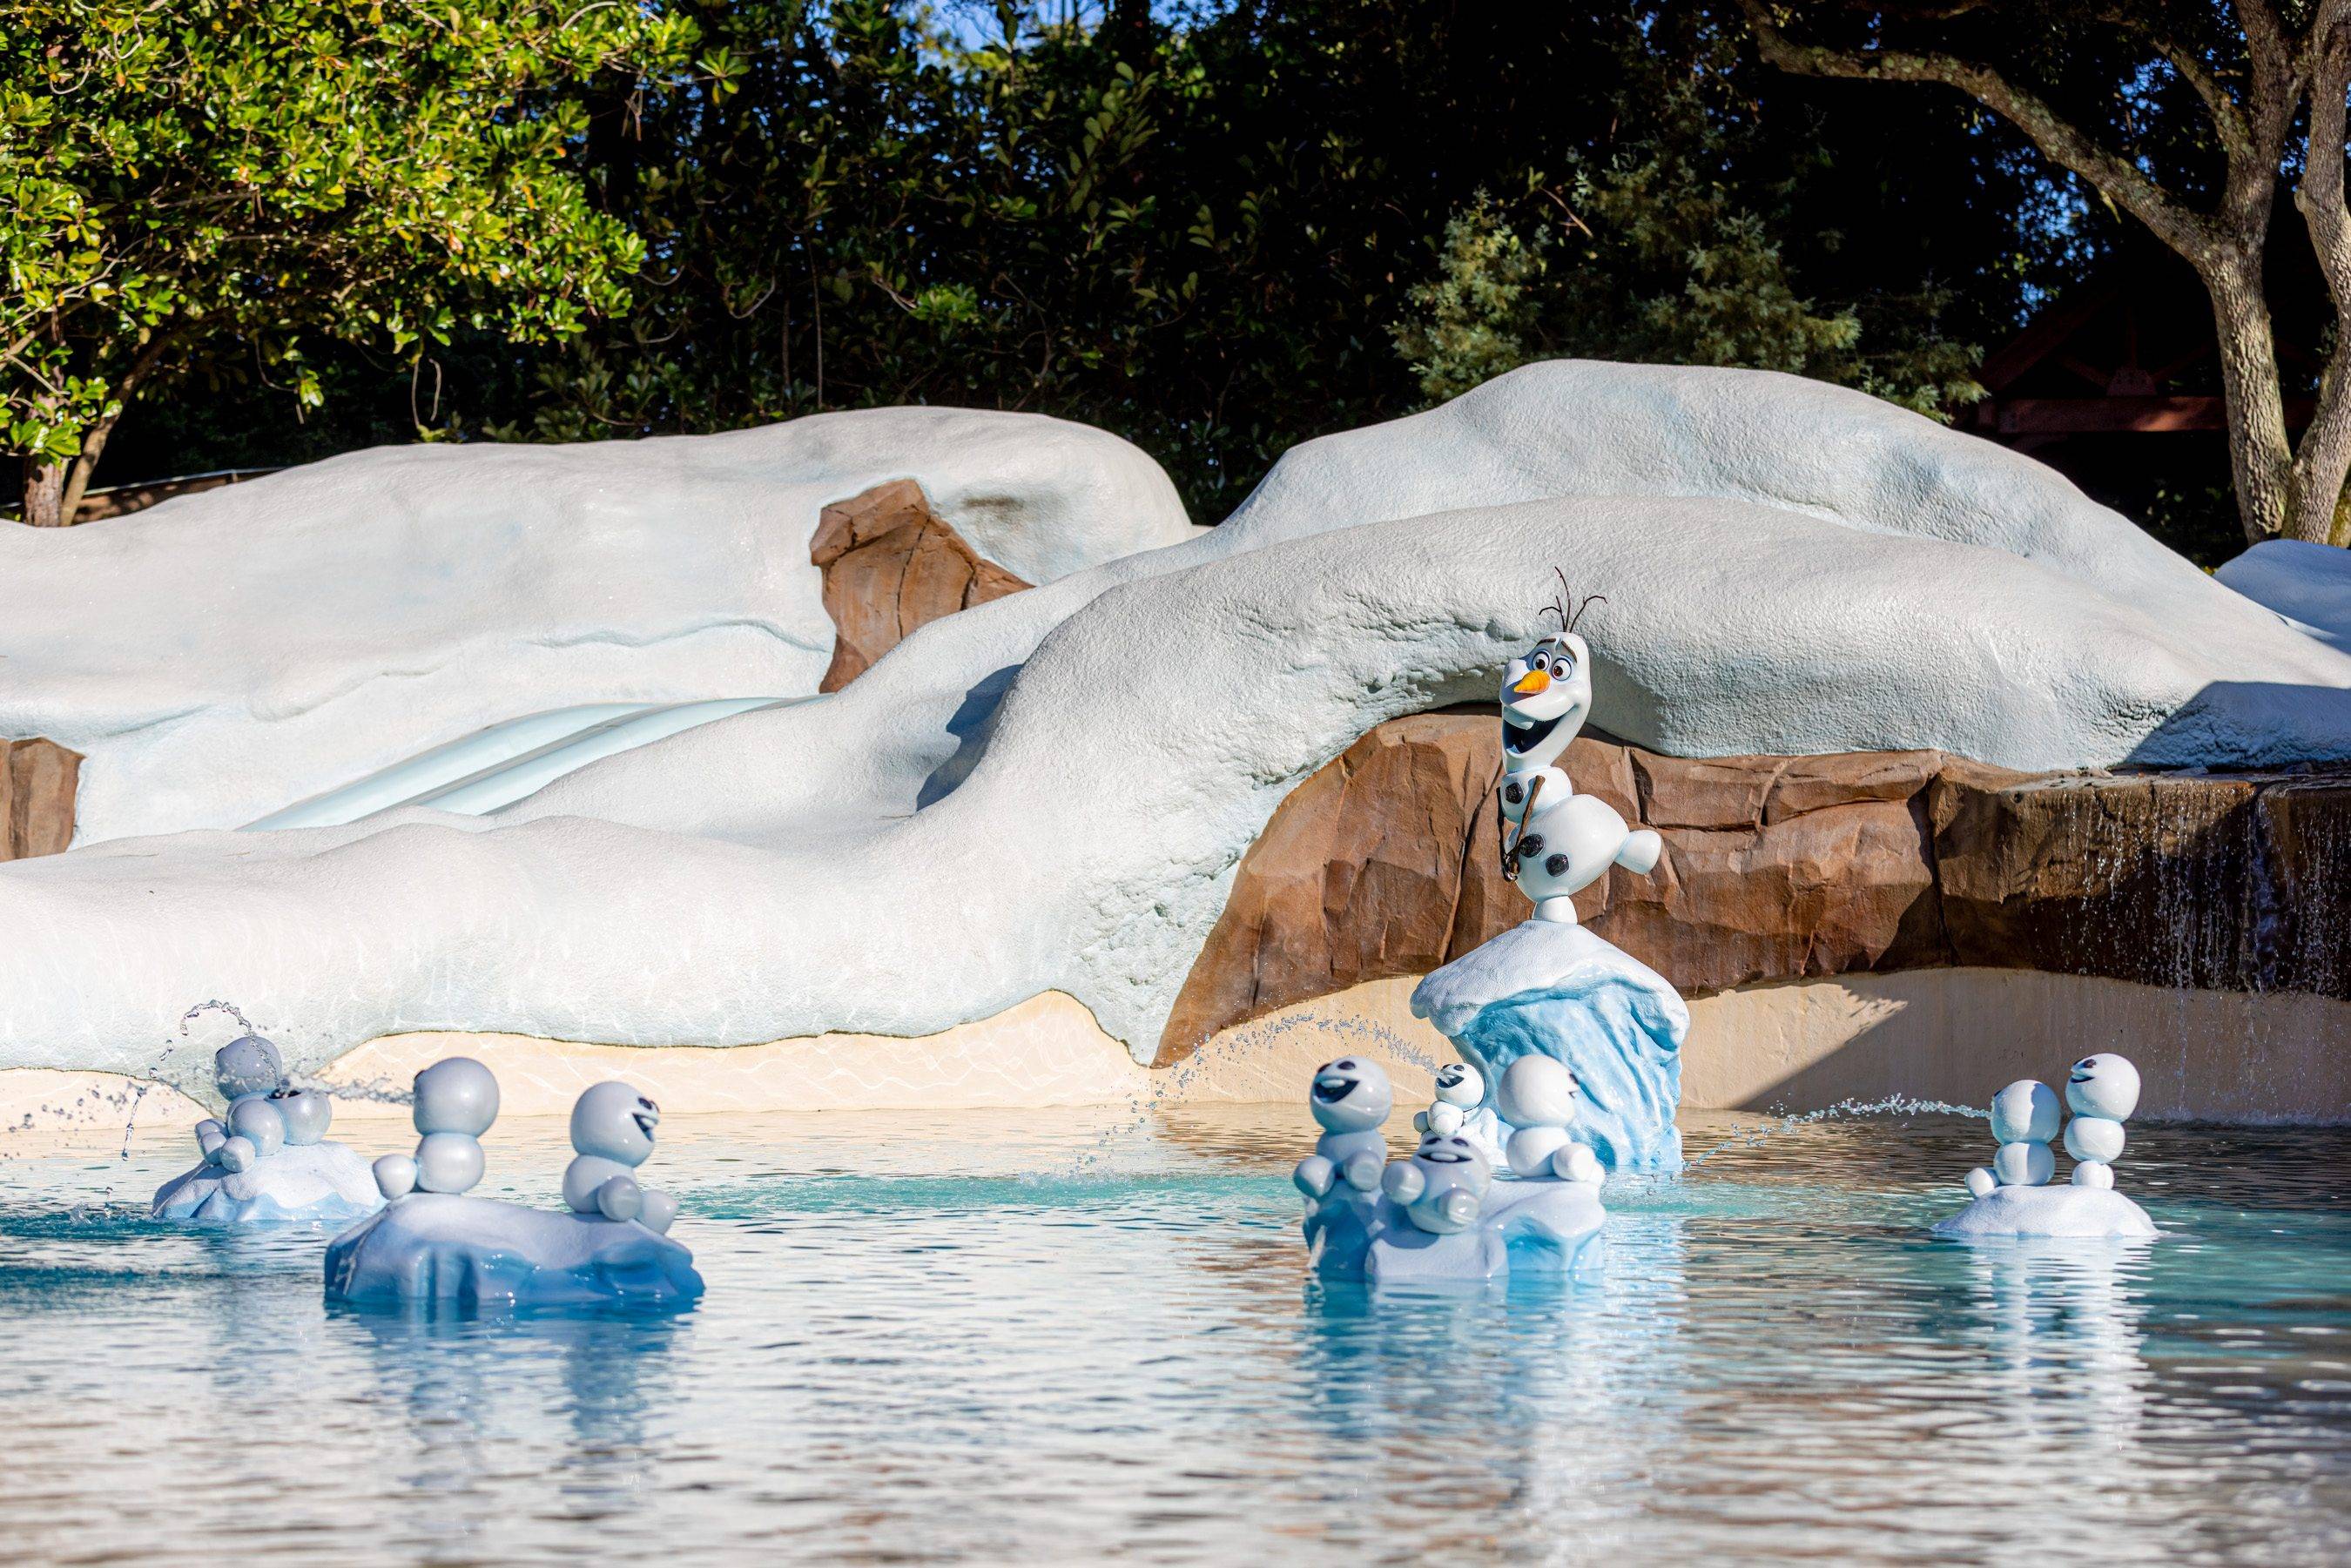 Disney's Blizzard Beach Water Park to reopen November 13 with new 'Frozen' touches